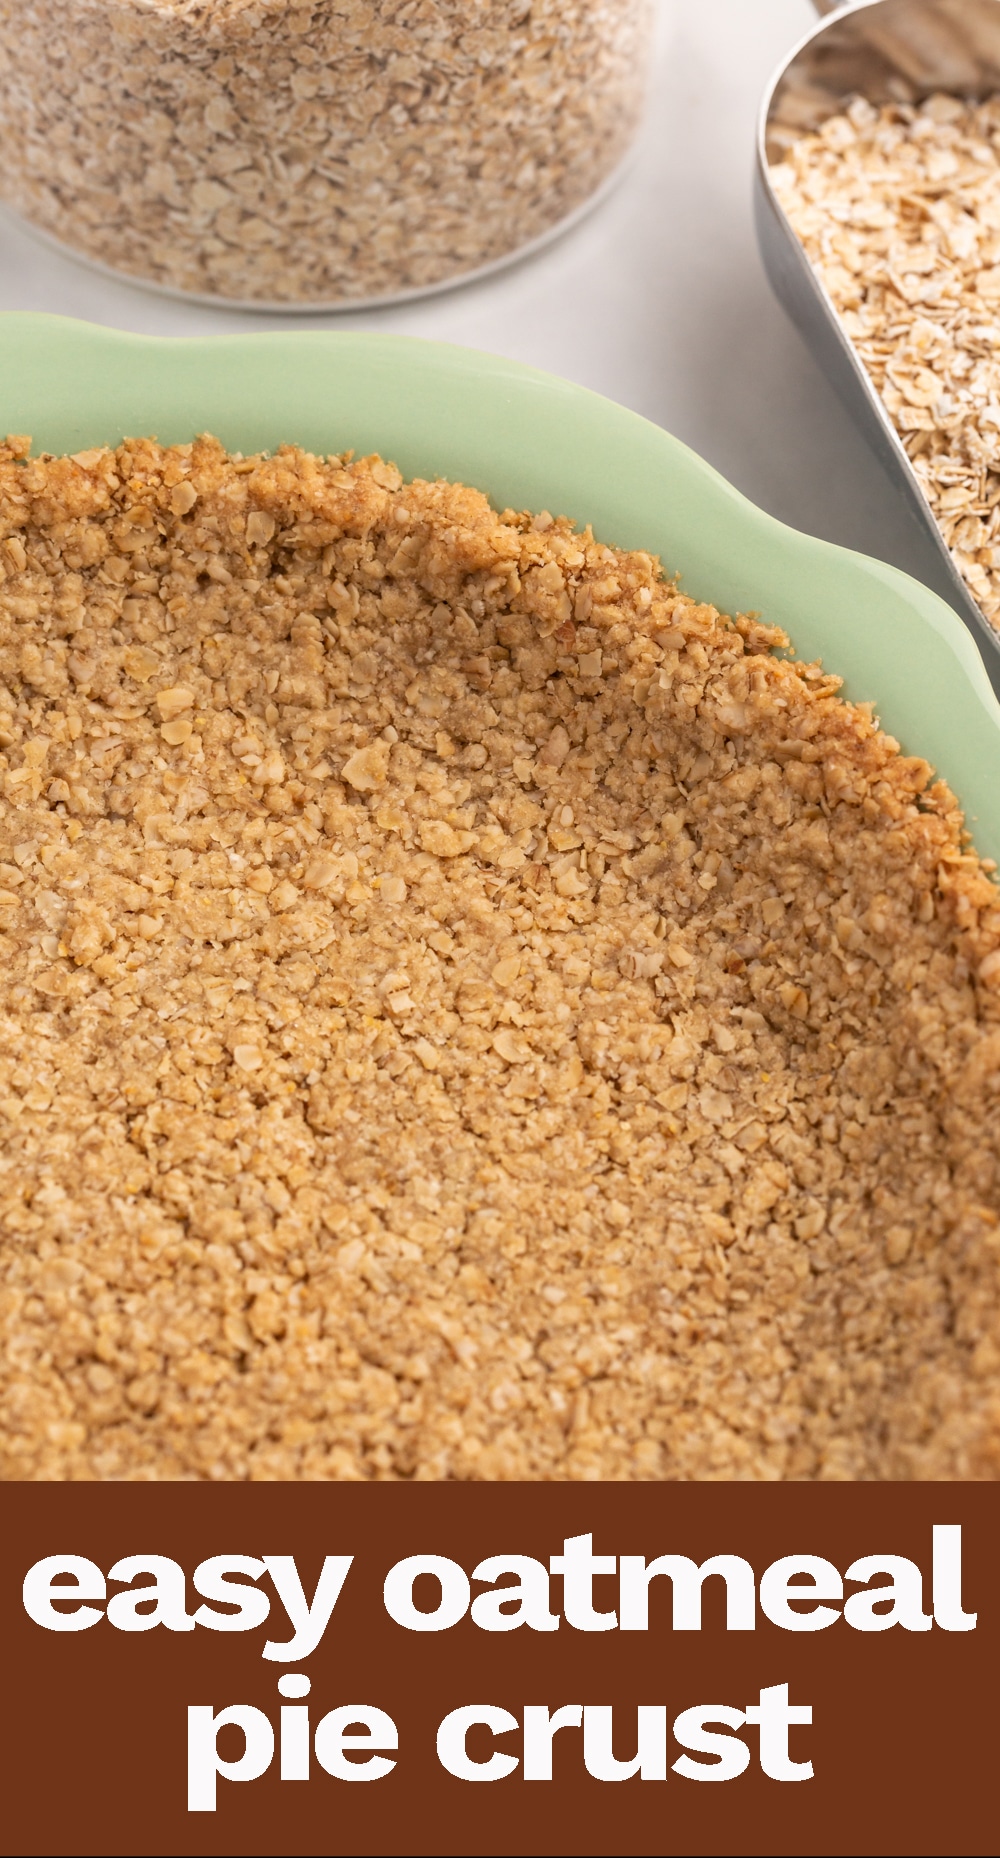 Tired of graham cracker crusts? This 5 ingredient, brown sugar, easy oatmeal pie crust makes a unique base to creamy, no-bake pies. via @tastesoflizzyt